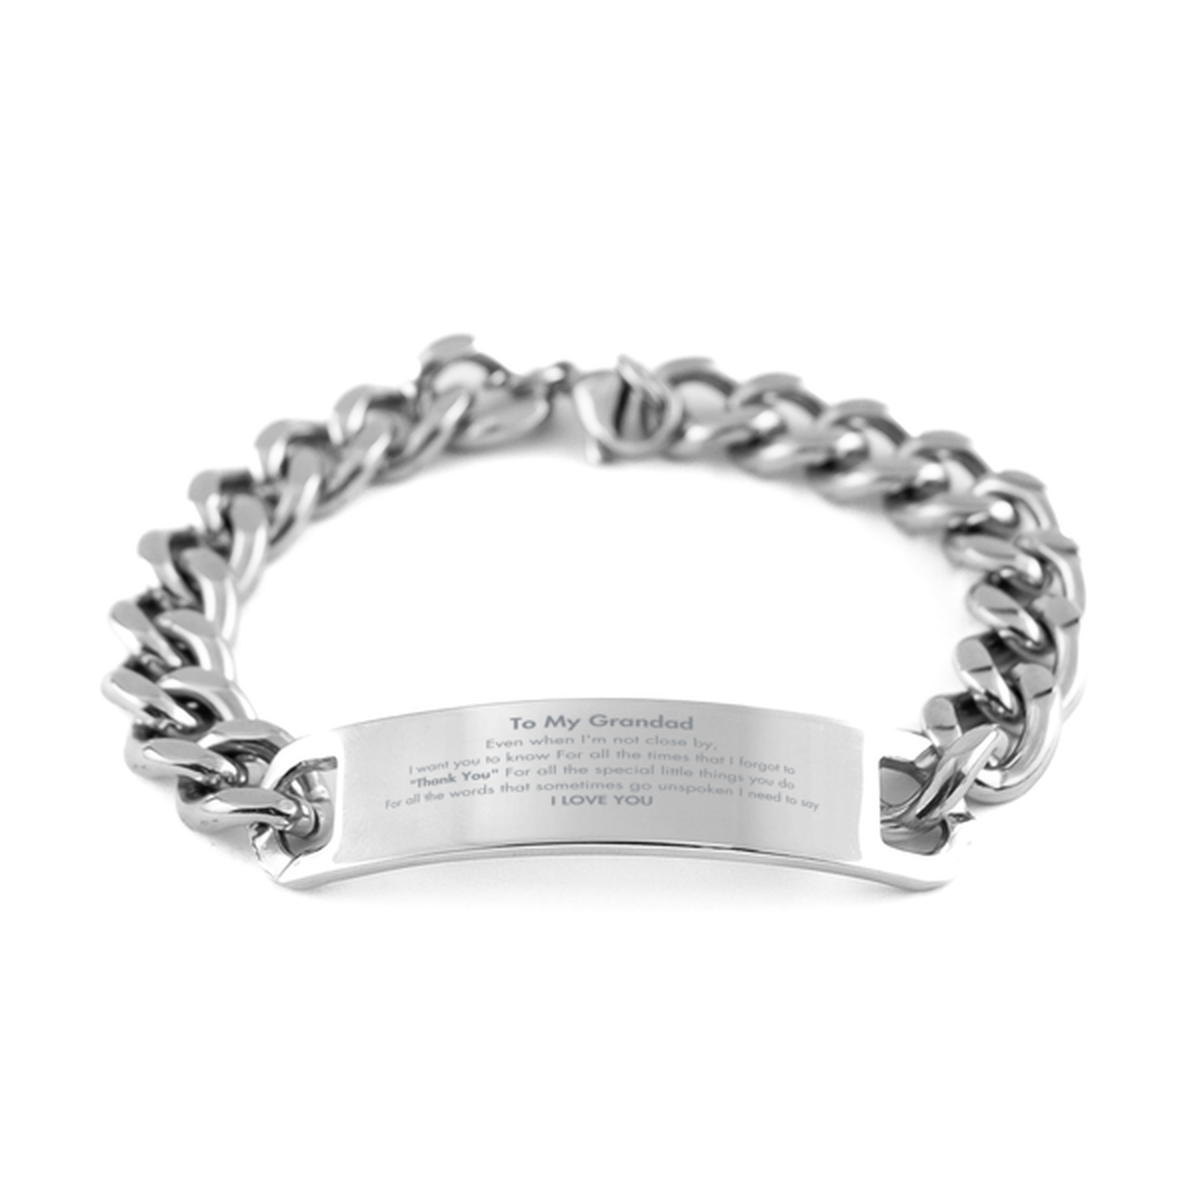 Thank You Gifts for Grandad, Keepsake Cuban Chain Stainless Steel Bracelet Gifts for Grandad Birthday Mother's day Father's Day Grandad For all the words That sometimes go unspoken I need to say I LOVE YOU